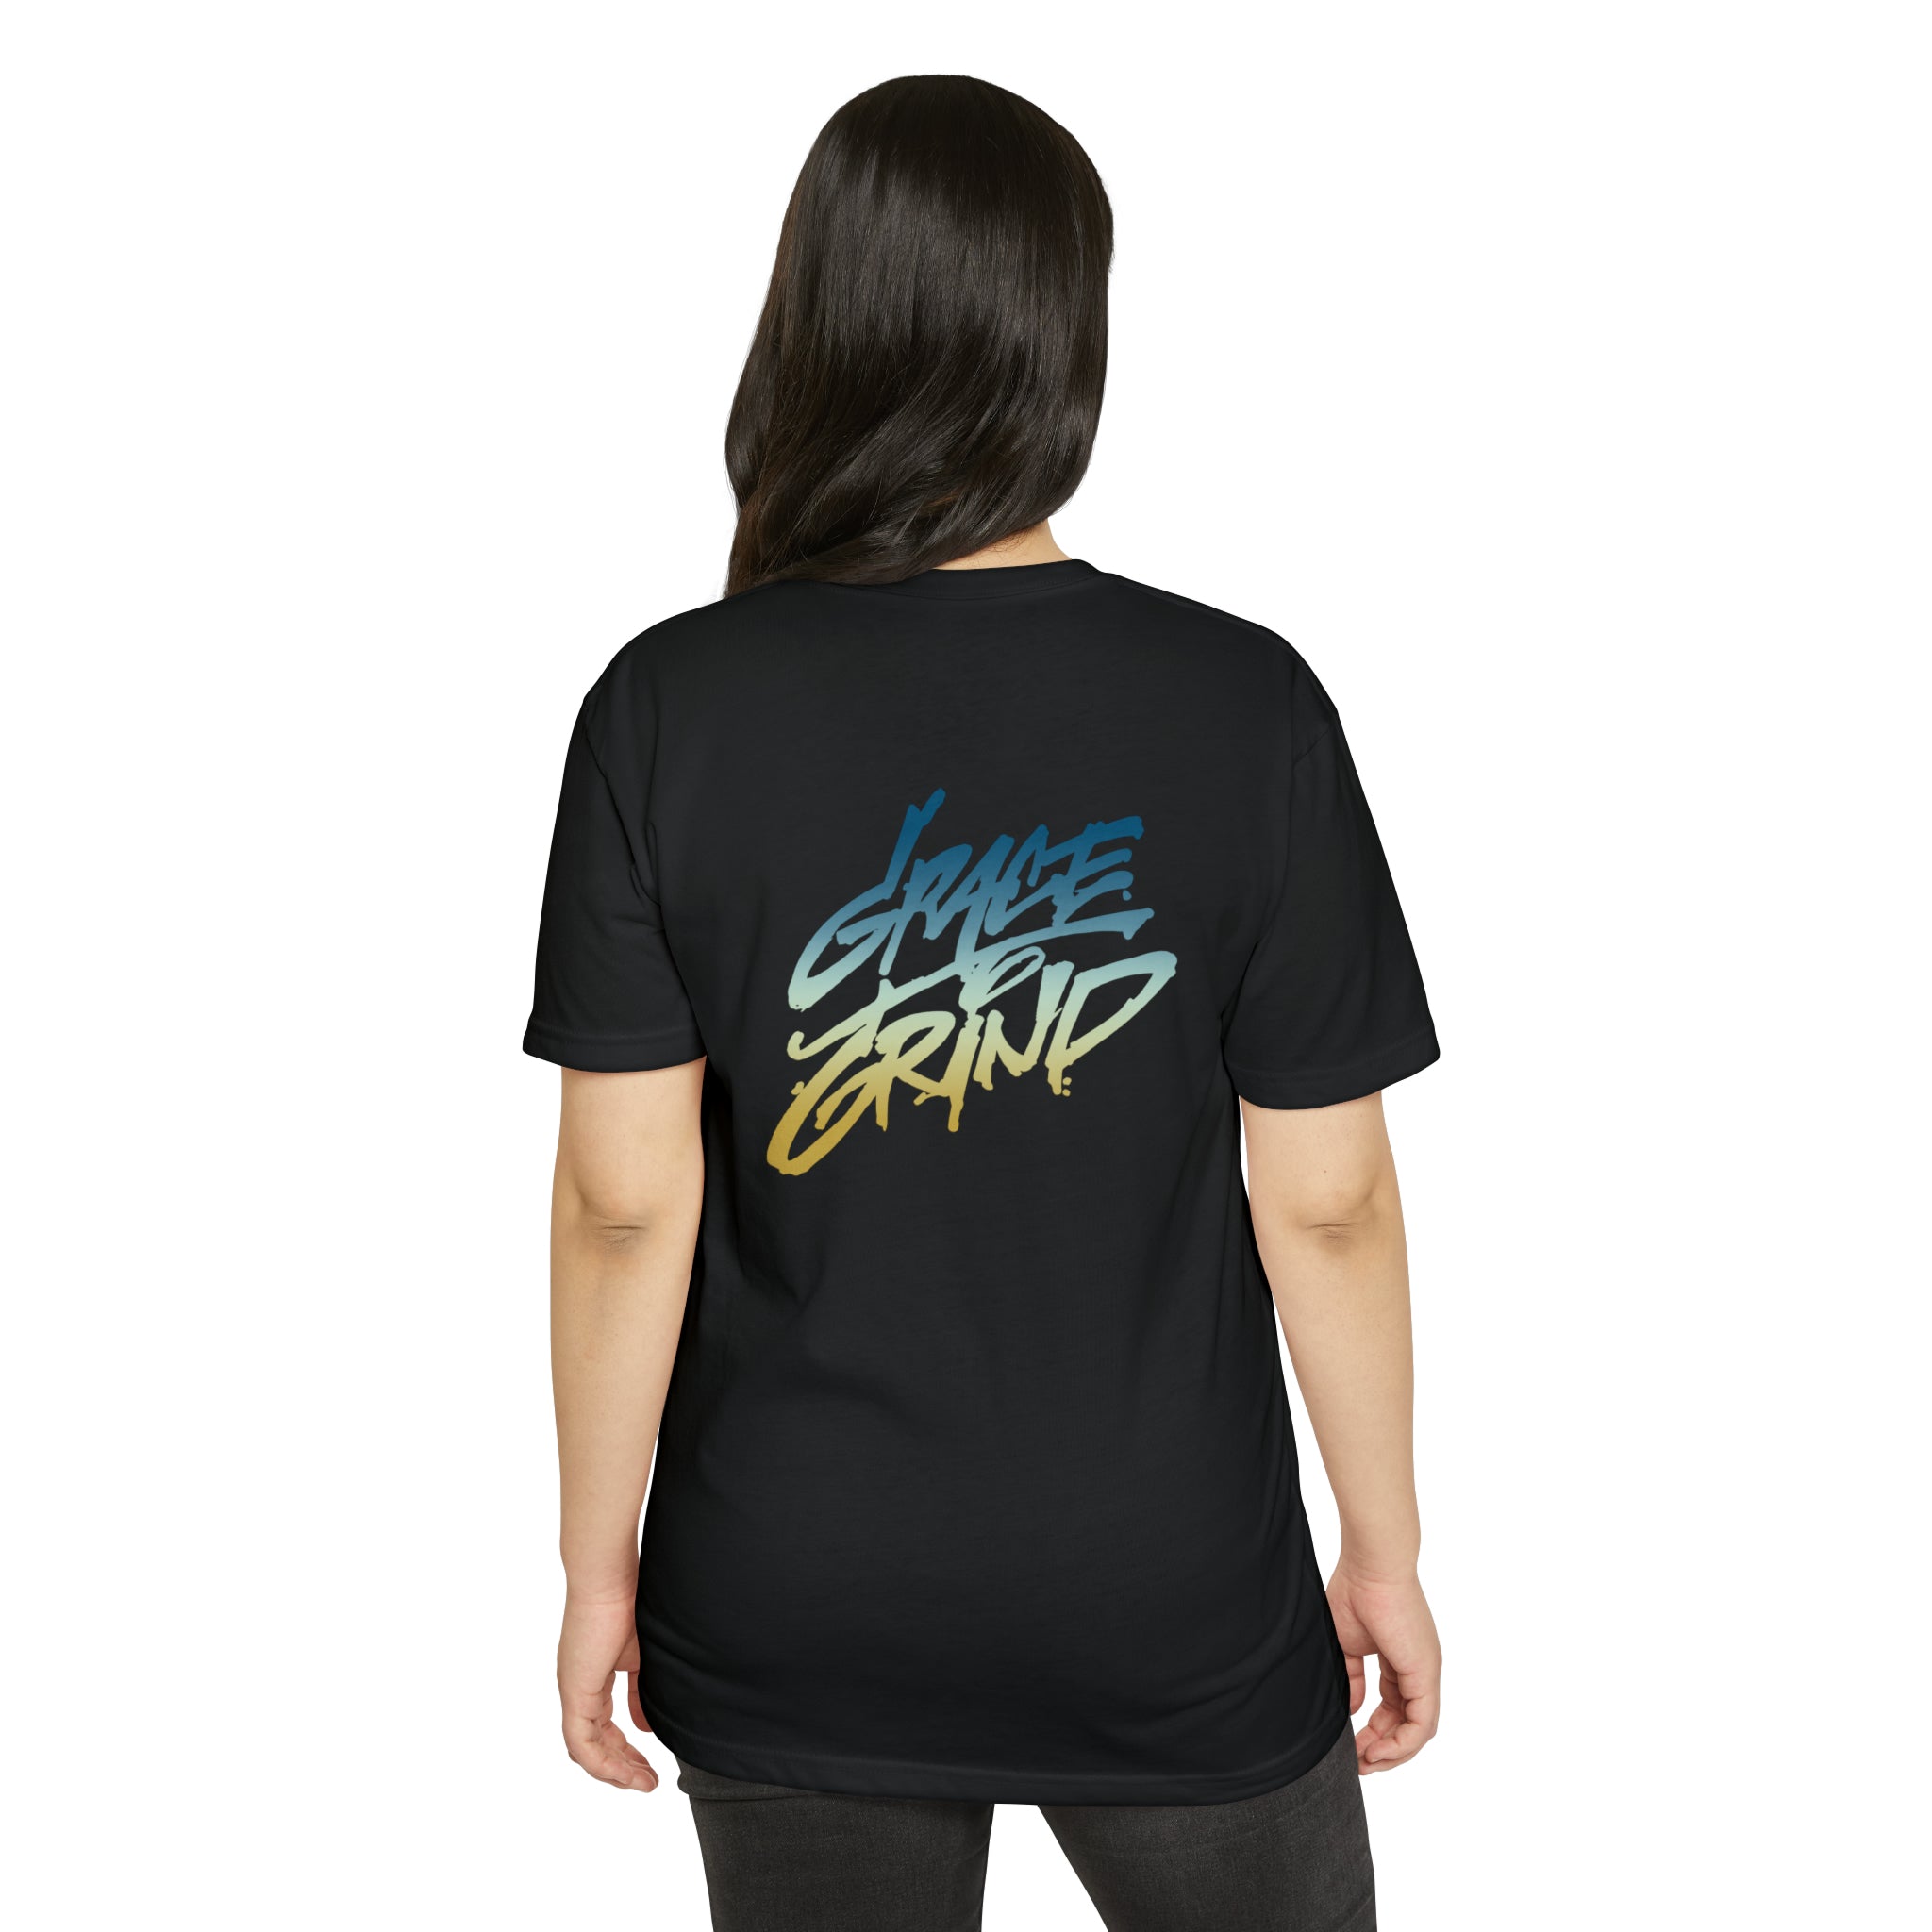 The Vibe Collection T-shirt